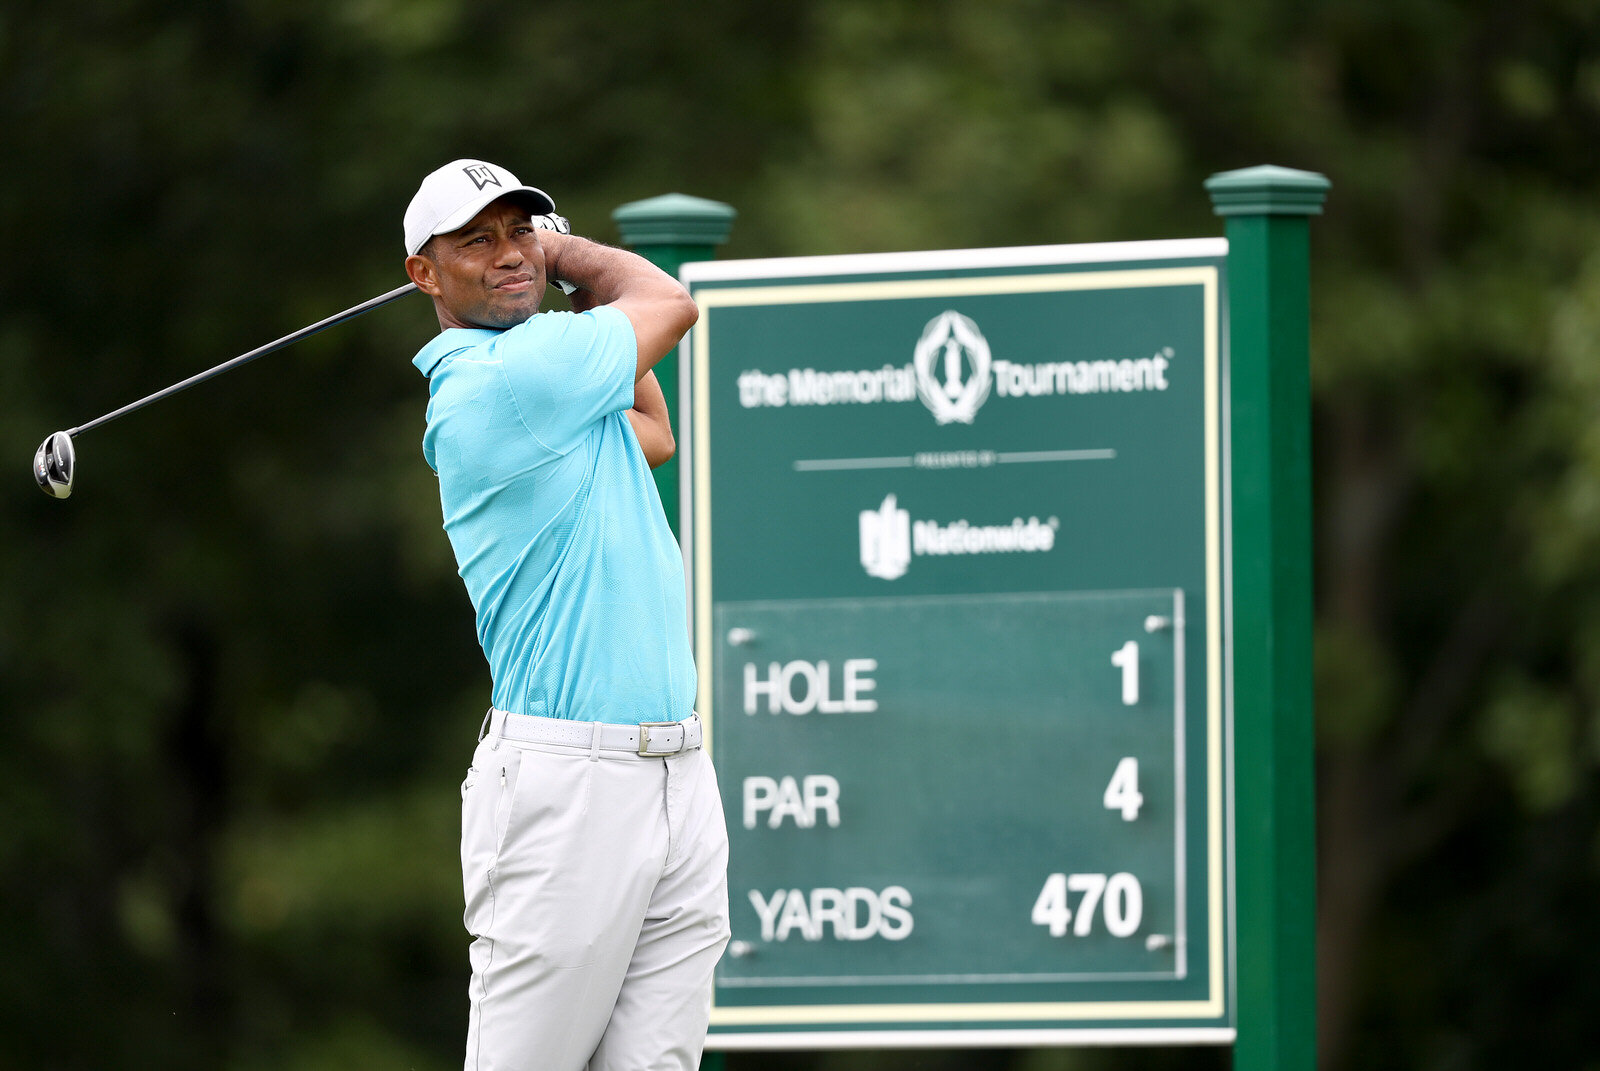  DUBLIN, OHIO - JULY 16: Tiger Woods of the United States plays his shot from the first tee during the first round of The Memorial Tournament on July 16, 2020 at Muirfield Village Golf Club in Dublin, Ohio. (Photo by Jamie Squire/Getty Images) 